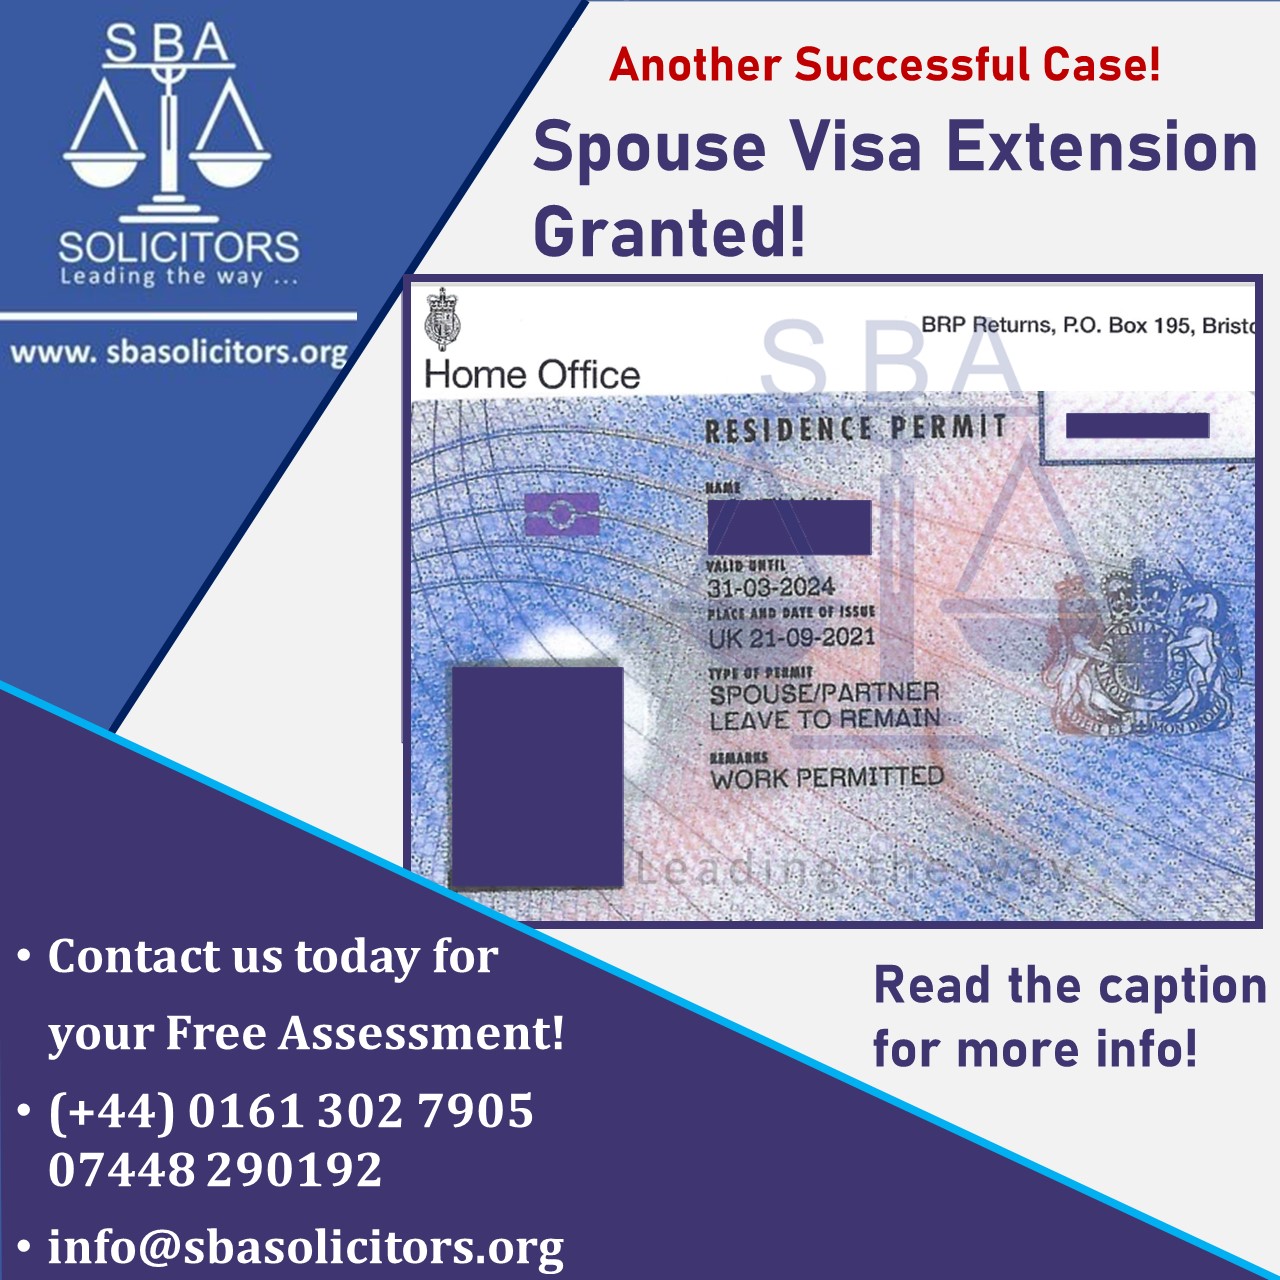 🔴First extension for spouse visa!

💯Here is what we did:
We advised the client on the criteria , provided a detailed list of documents specific for his case, drafted a specific cover letter, filled the online application, booked a free appointment, uploaded and scanned the documents for free and chased the courier service for the BRP after submission.

We are more than happy that our client got his extension in no time! We can’t wait to help him in the test of his journey!

⚖️SBA Solicitors will help you in every step of your journey!

Contact us today for your free consultation!
+44 (0) 161 302 7905
+44 (0) 7448 290192
Info@sbasolicitors.org